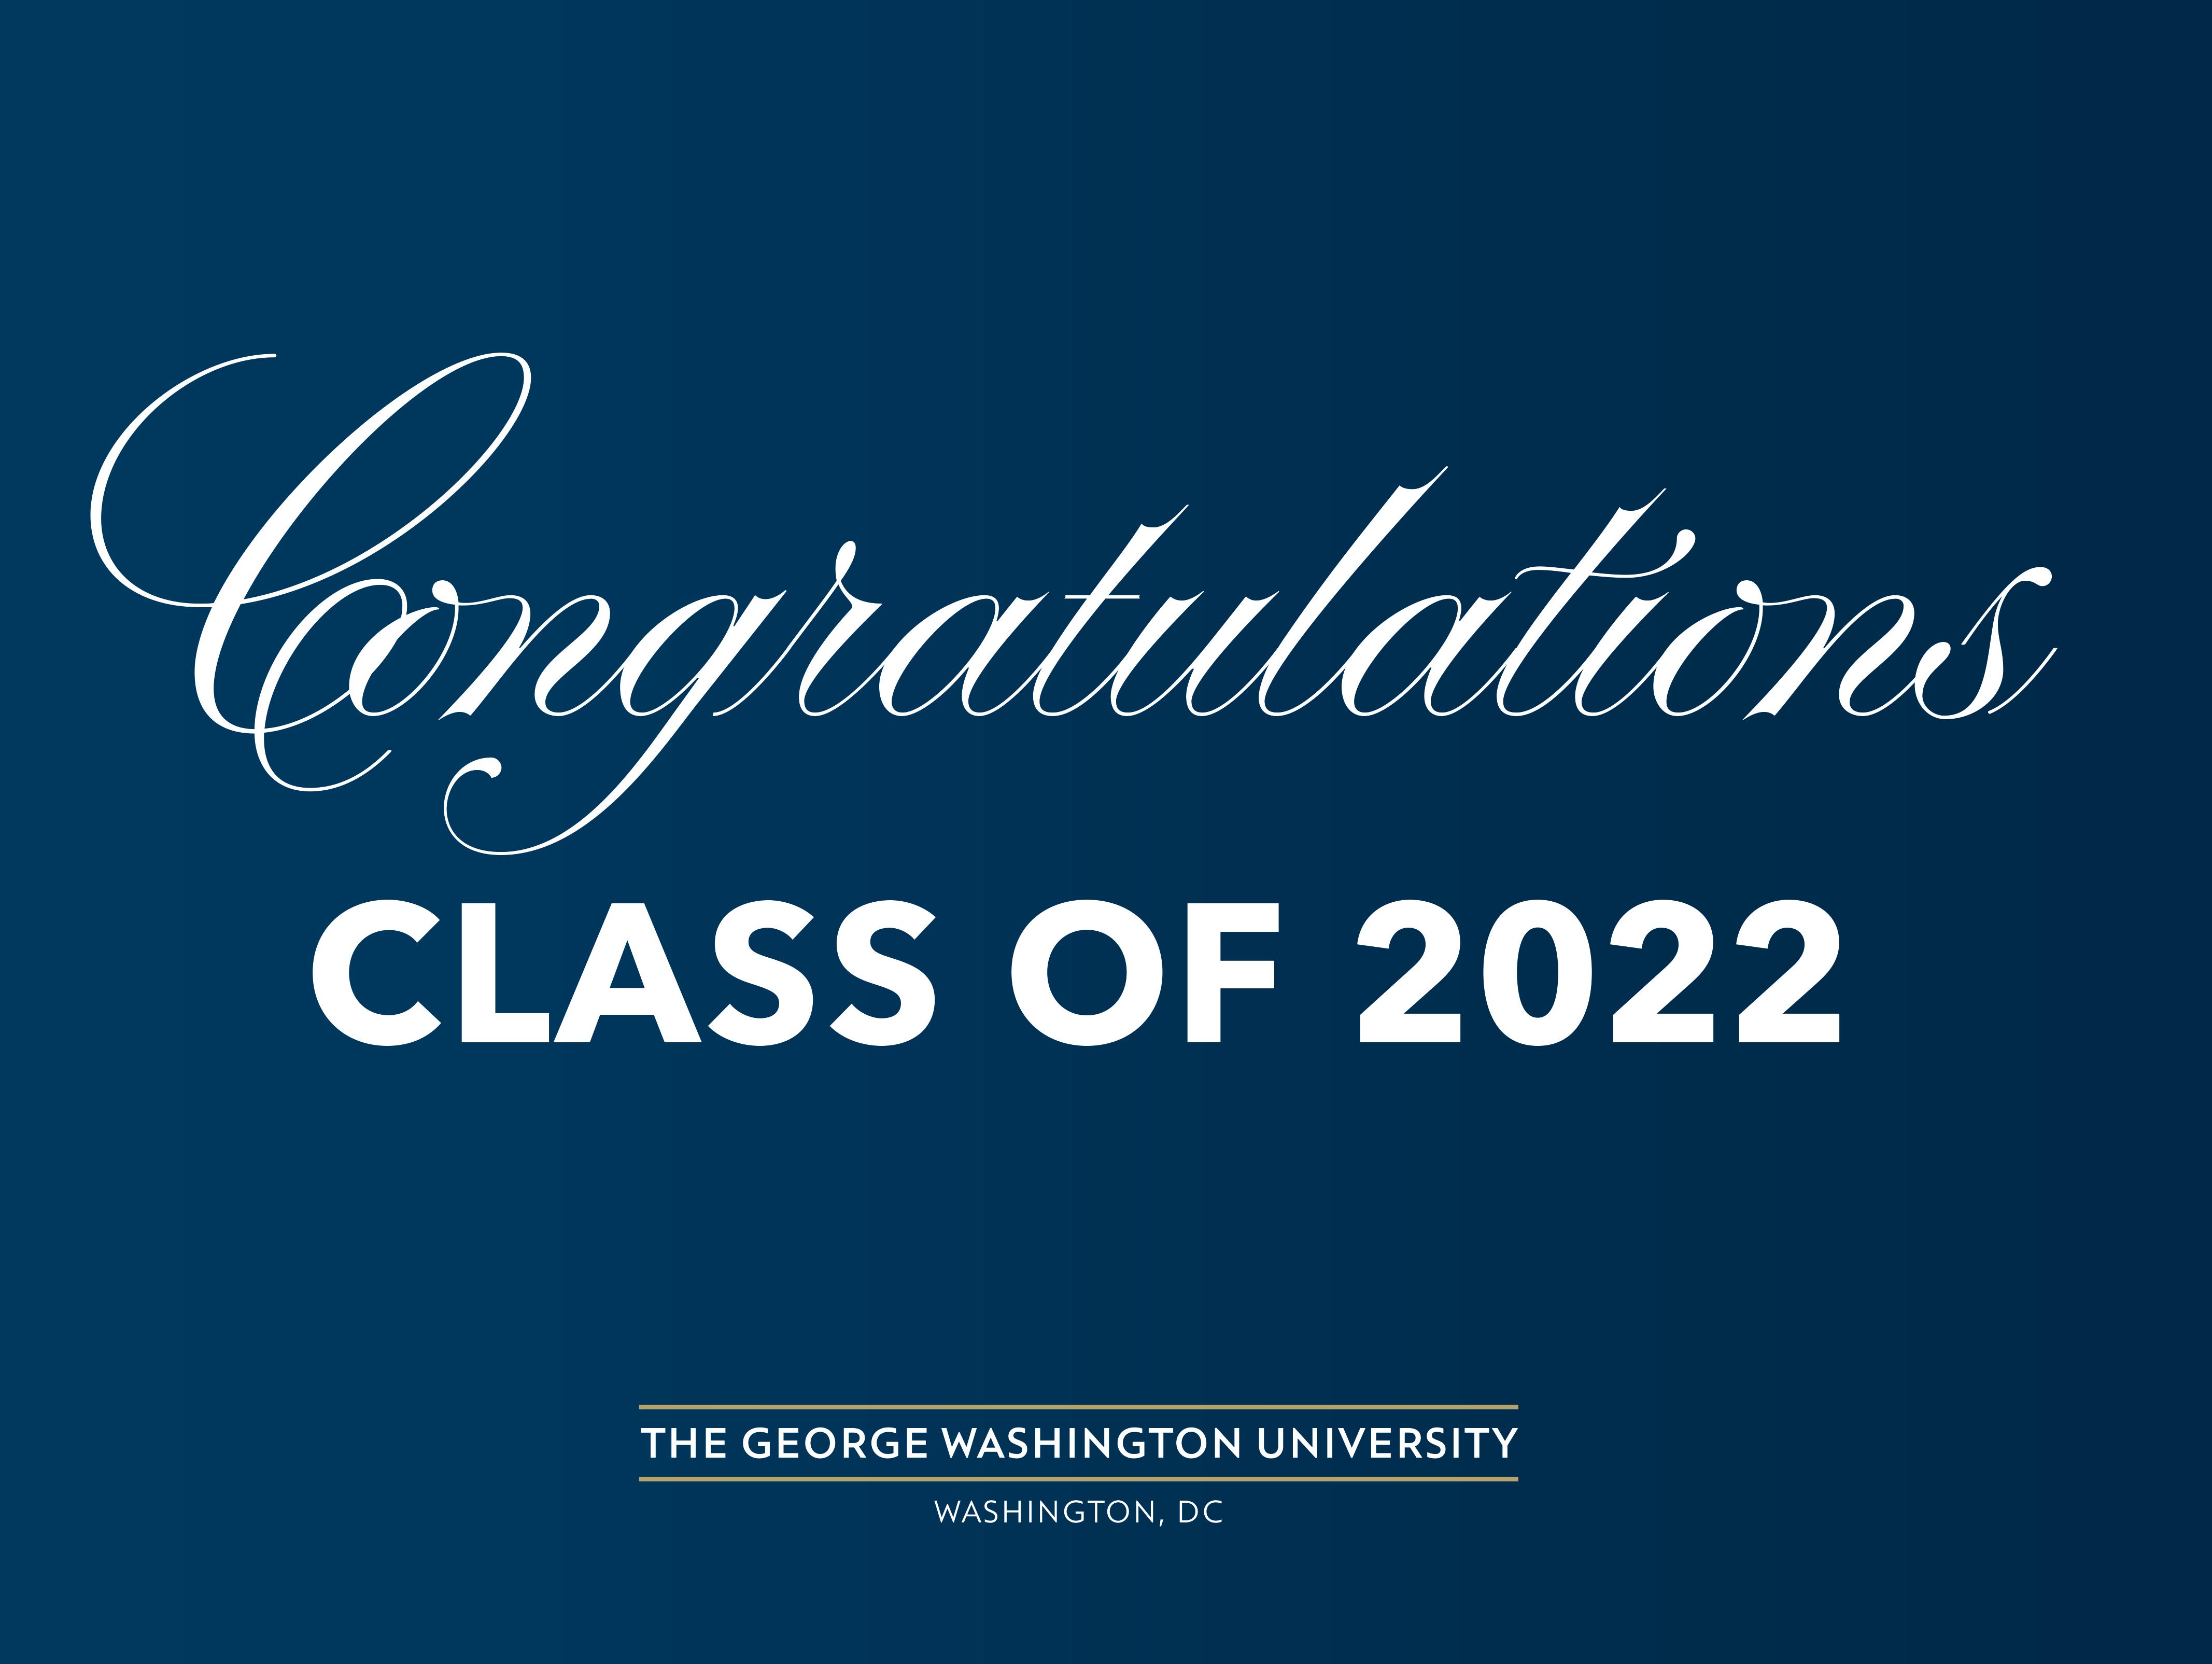 Blue background with white text reading "Congratulations Class of 2022"